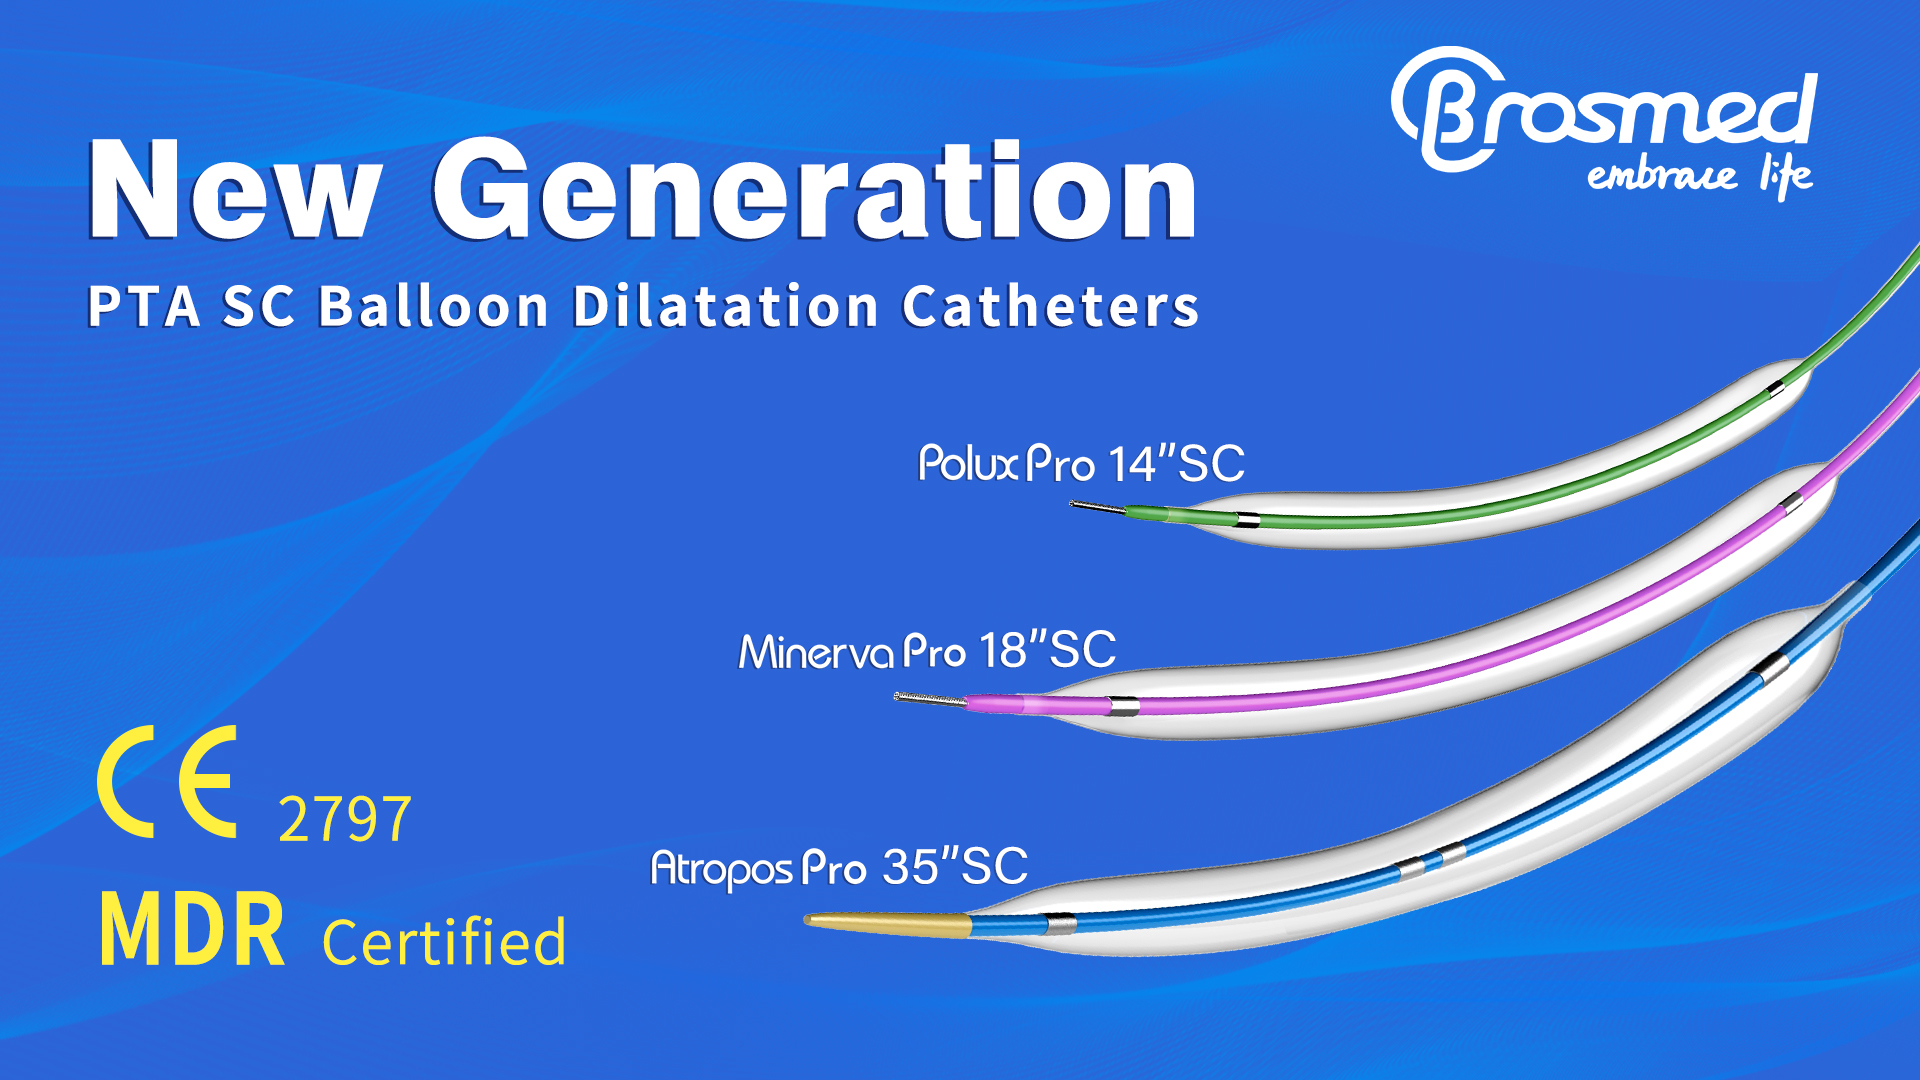 BrosMed Announced CE MDR Approval of New Generation PTA SC Balloon Dilatation Catheters